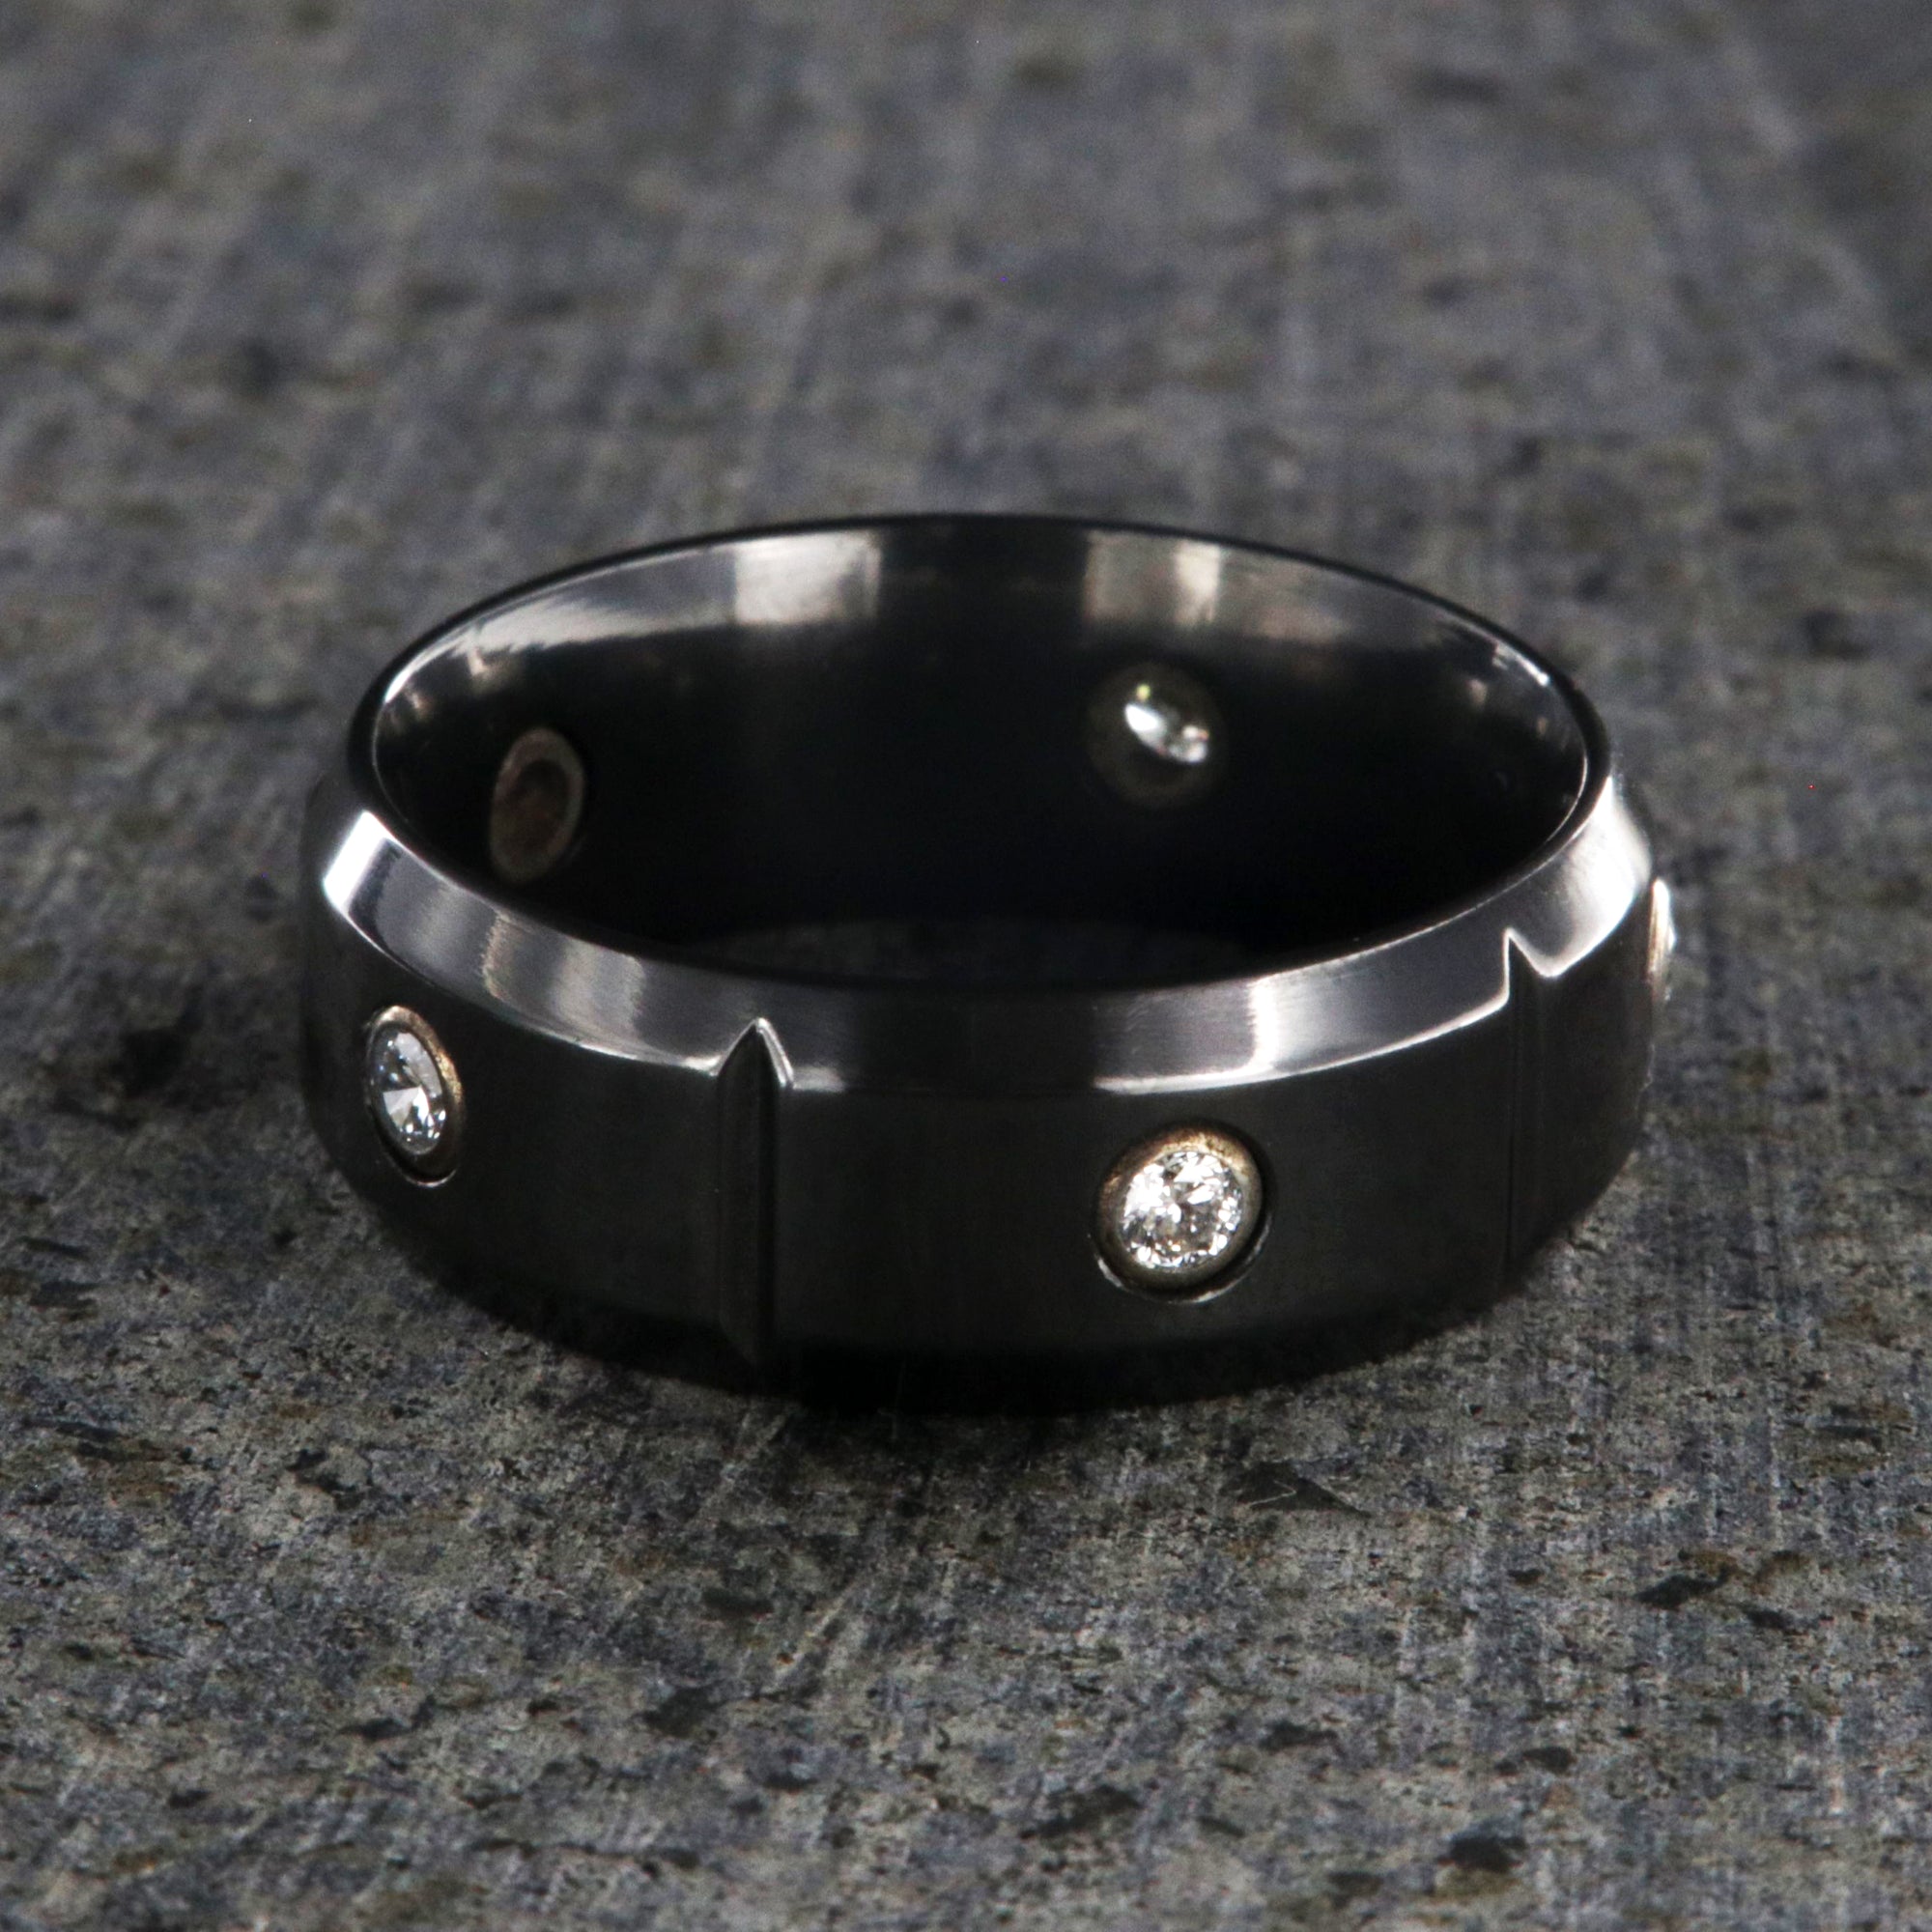 8mm wide black zirconium wedding band with 5 diamonds, beveled edges, and vertical grooves